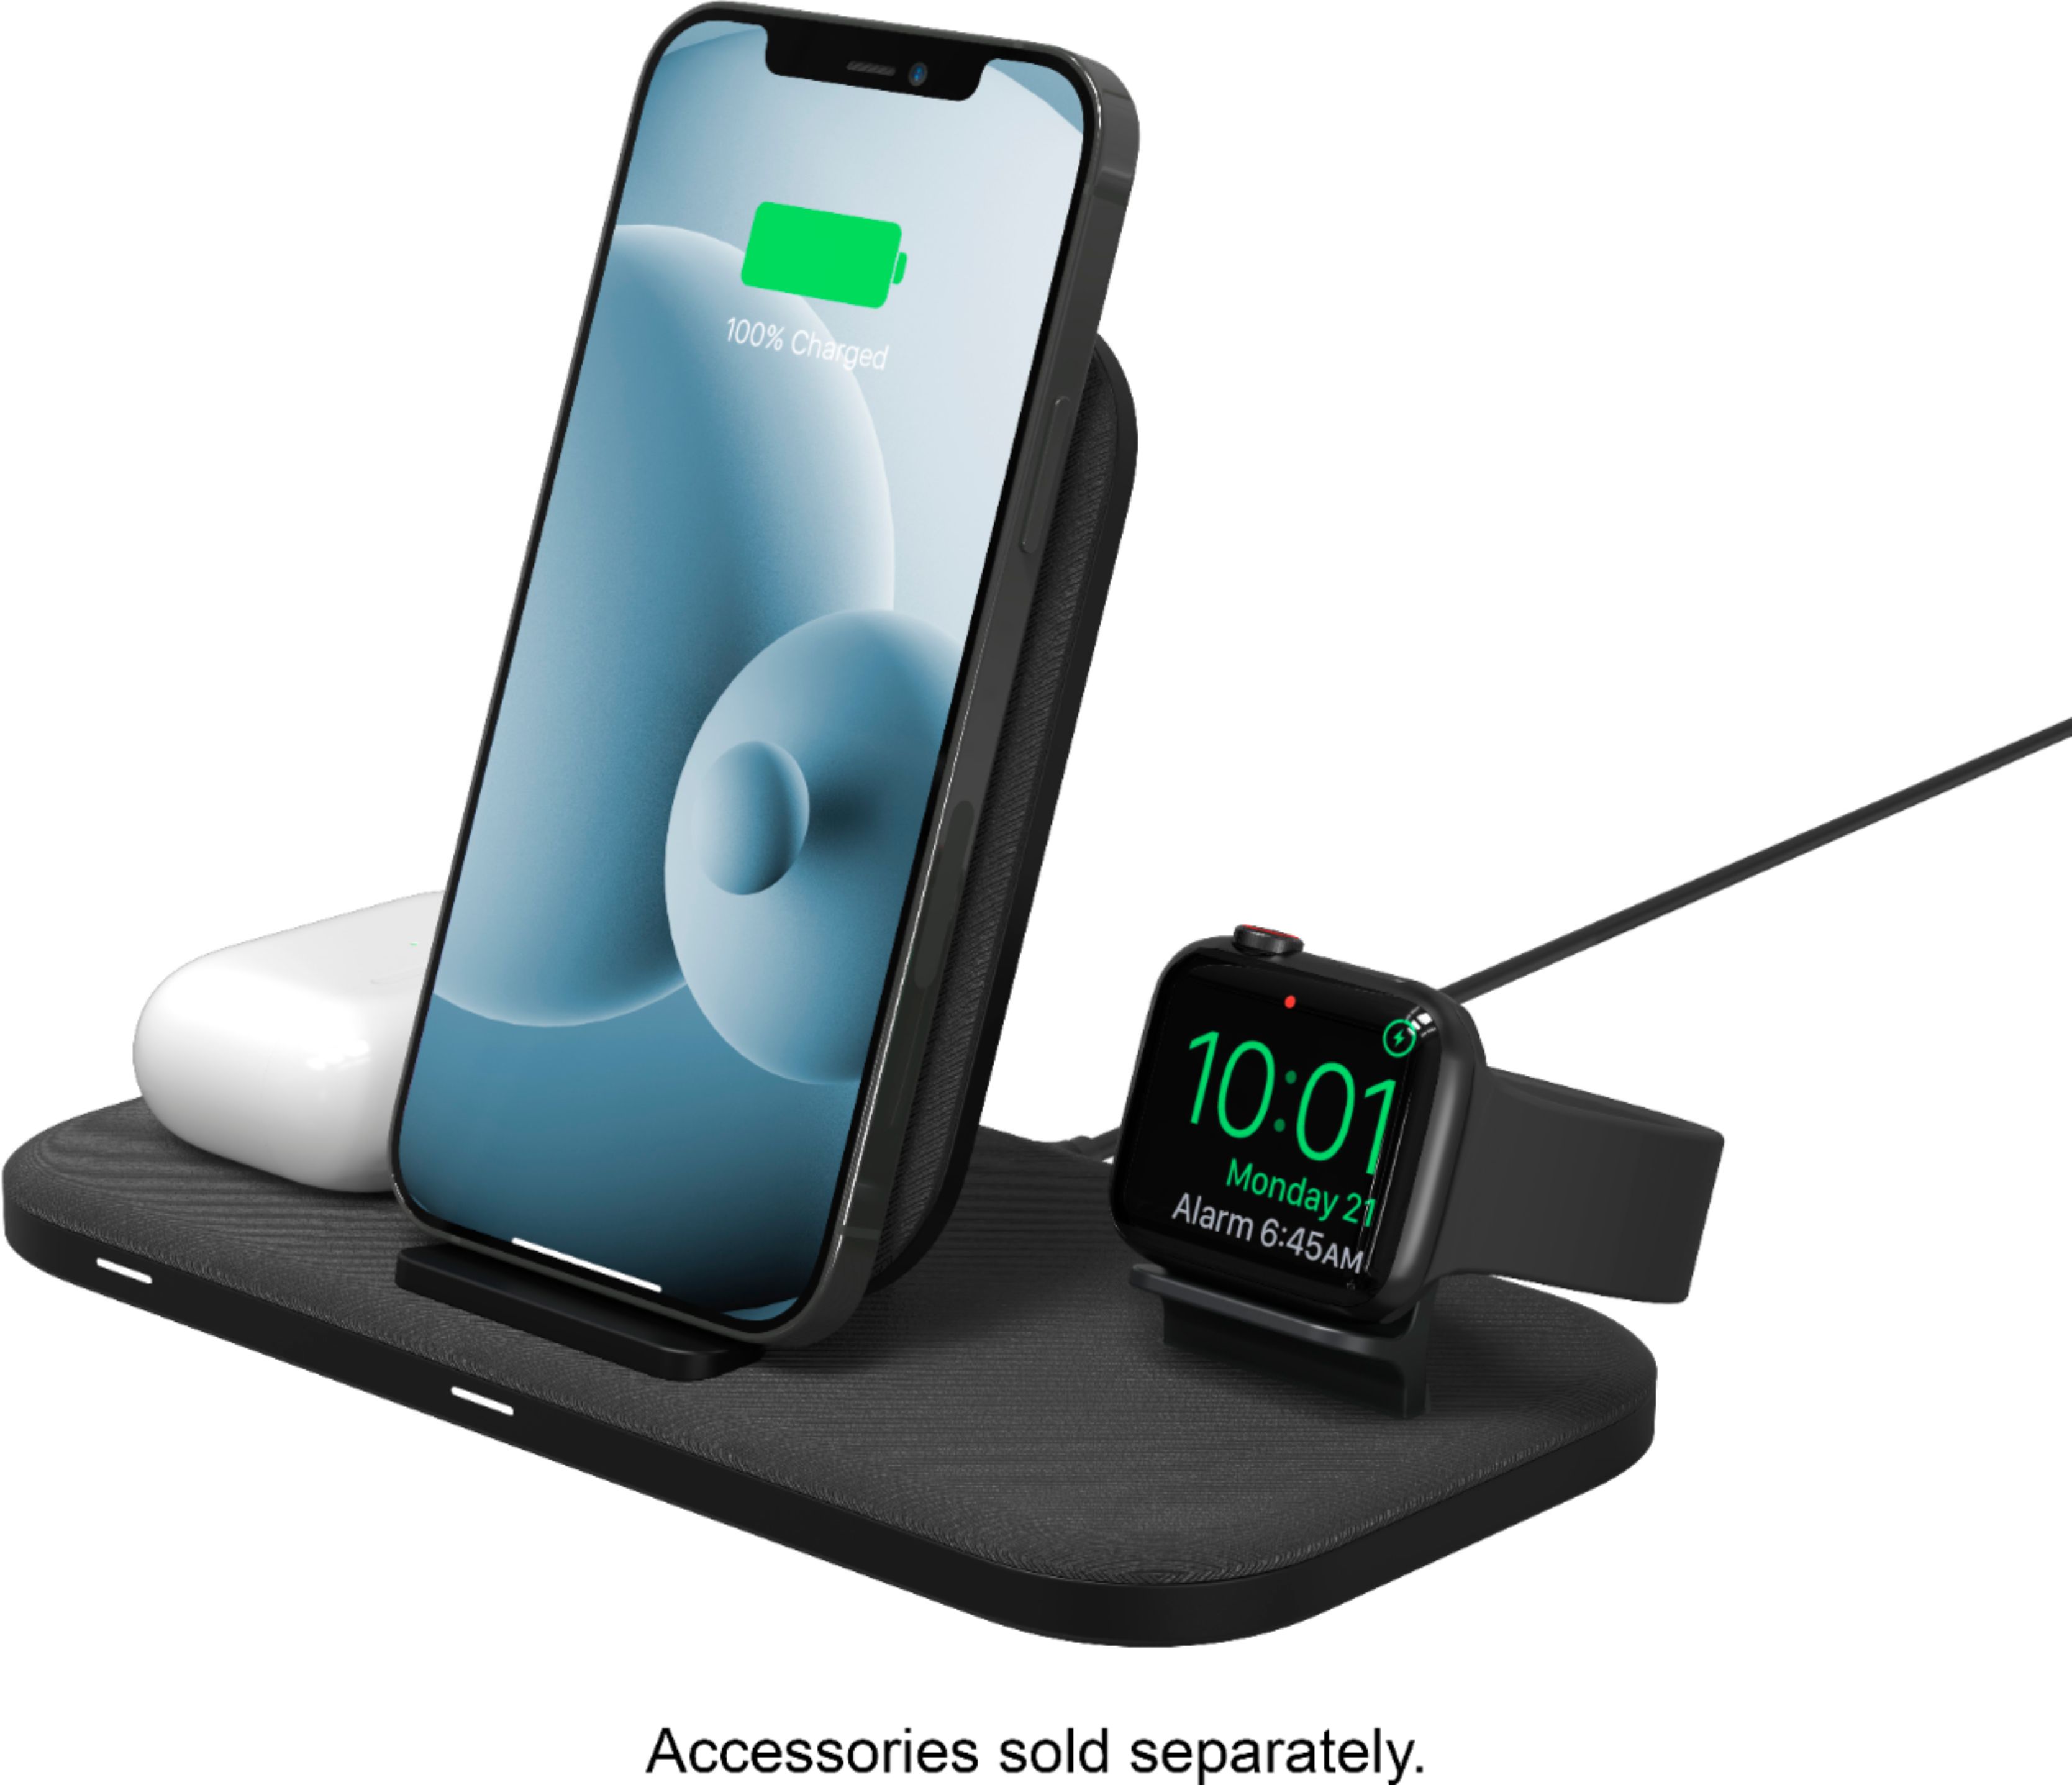 mophie's new 3-in-1 wireless charging stand with MagSafe